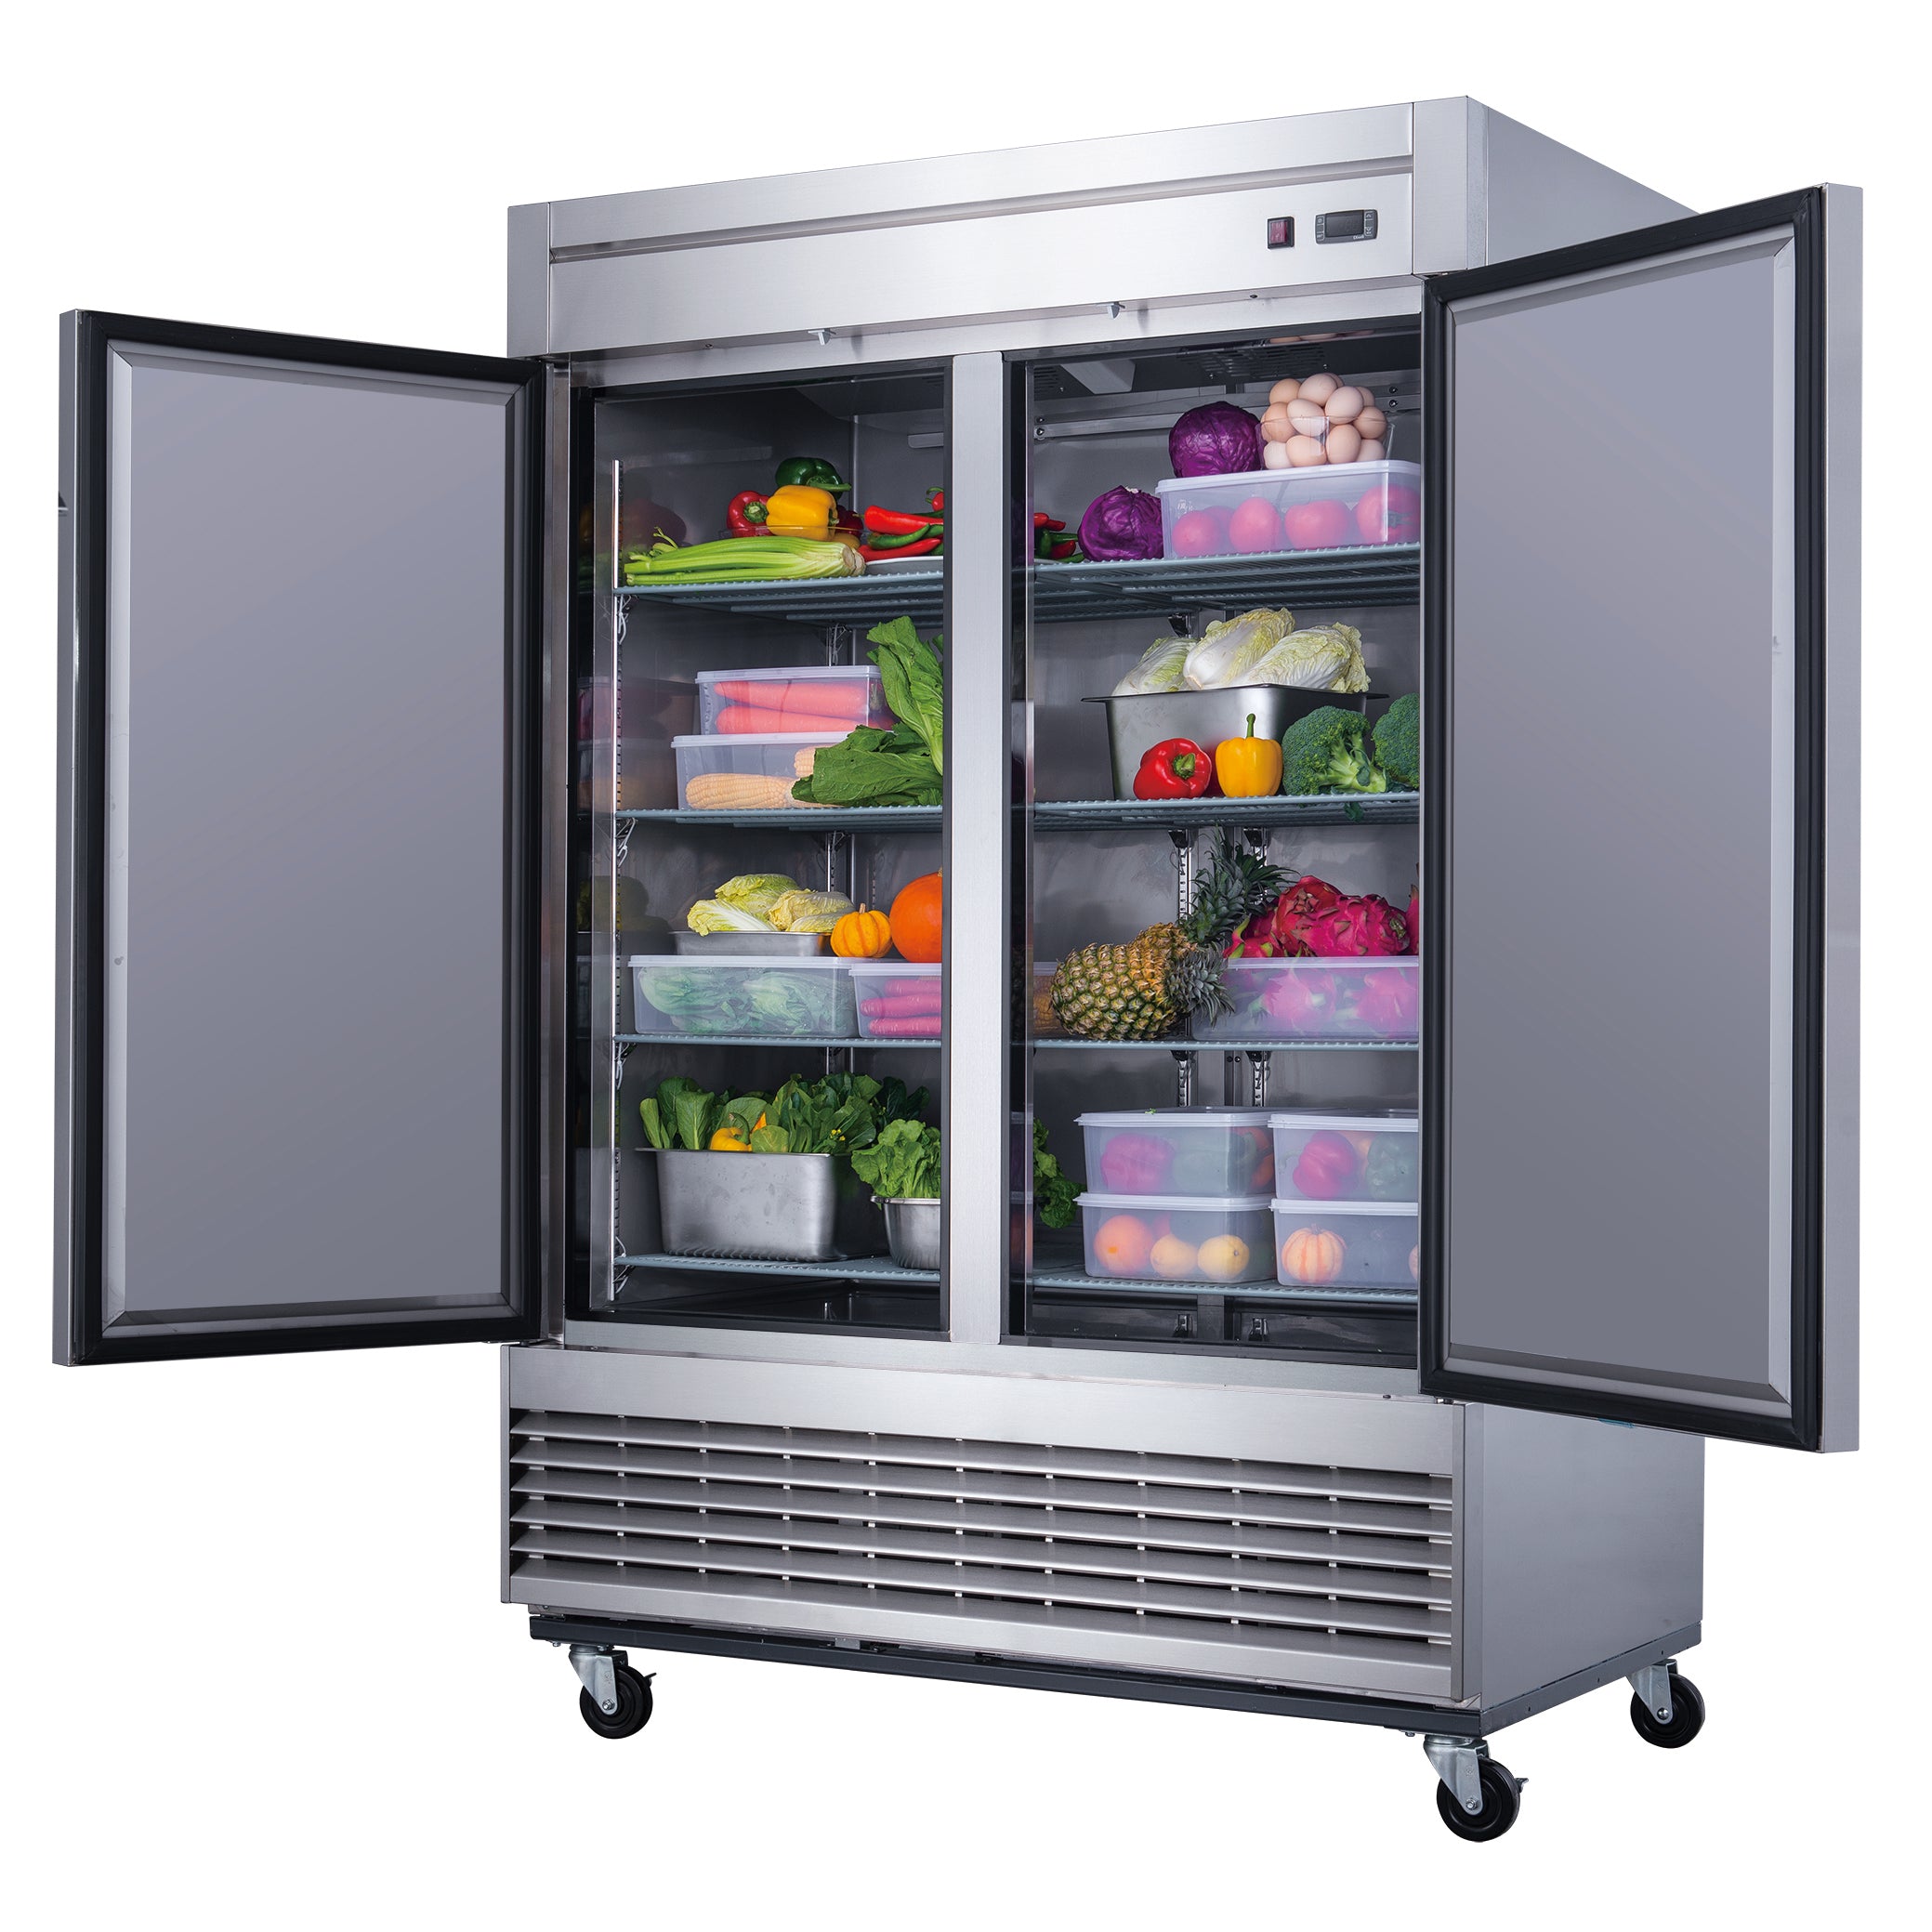 Dukers - D55R, Commercial 55" 2 Solid Door Reach-In Refrigerator Stainless Steel 40.74 cu. ft.